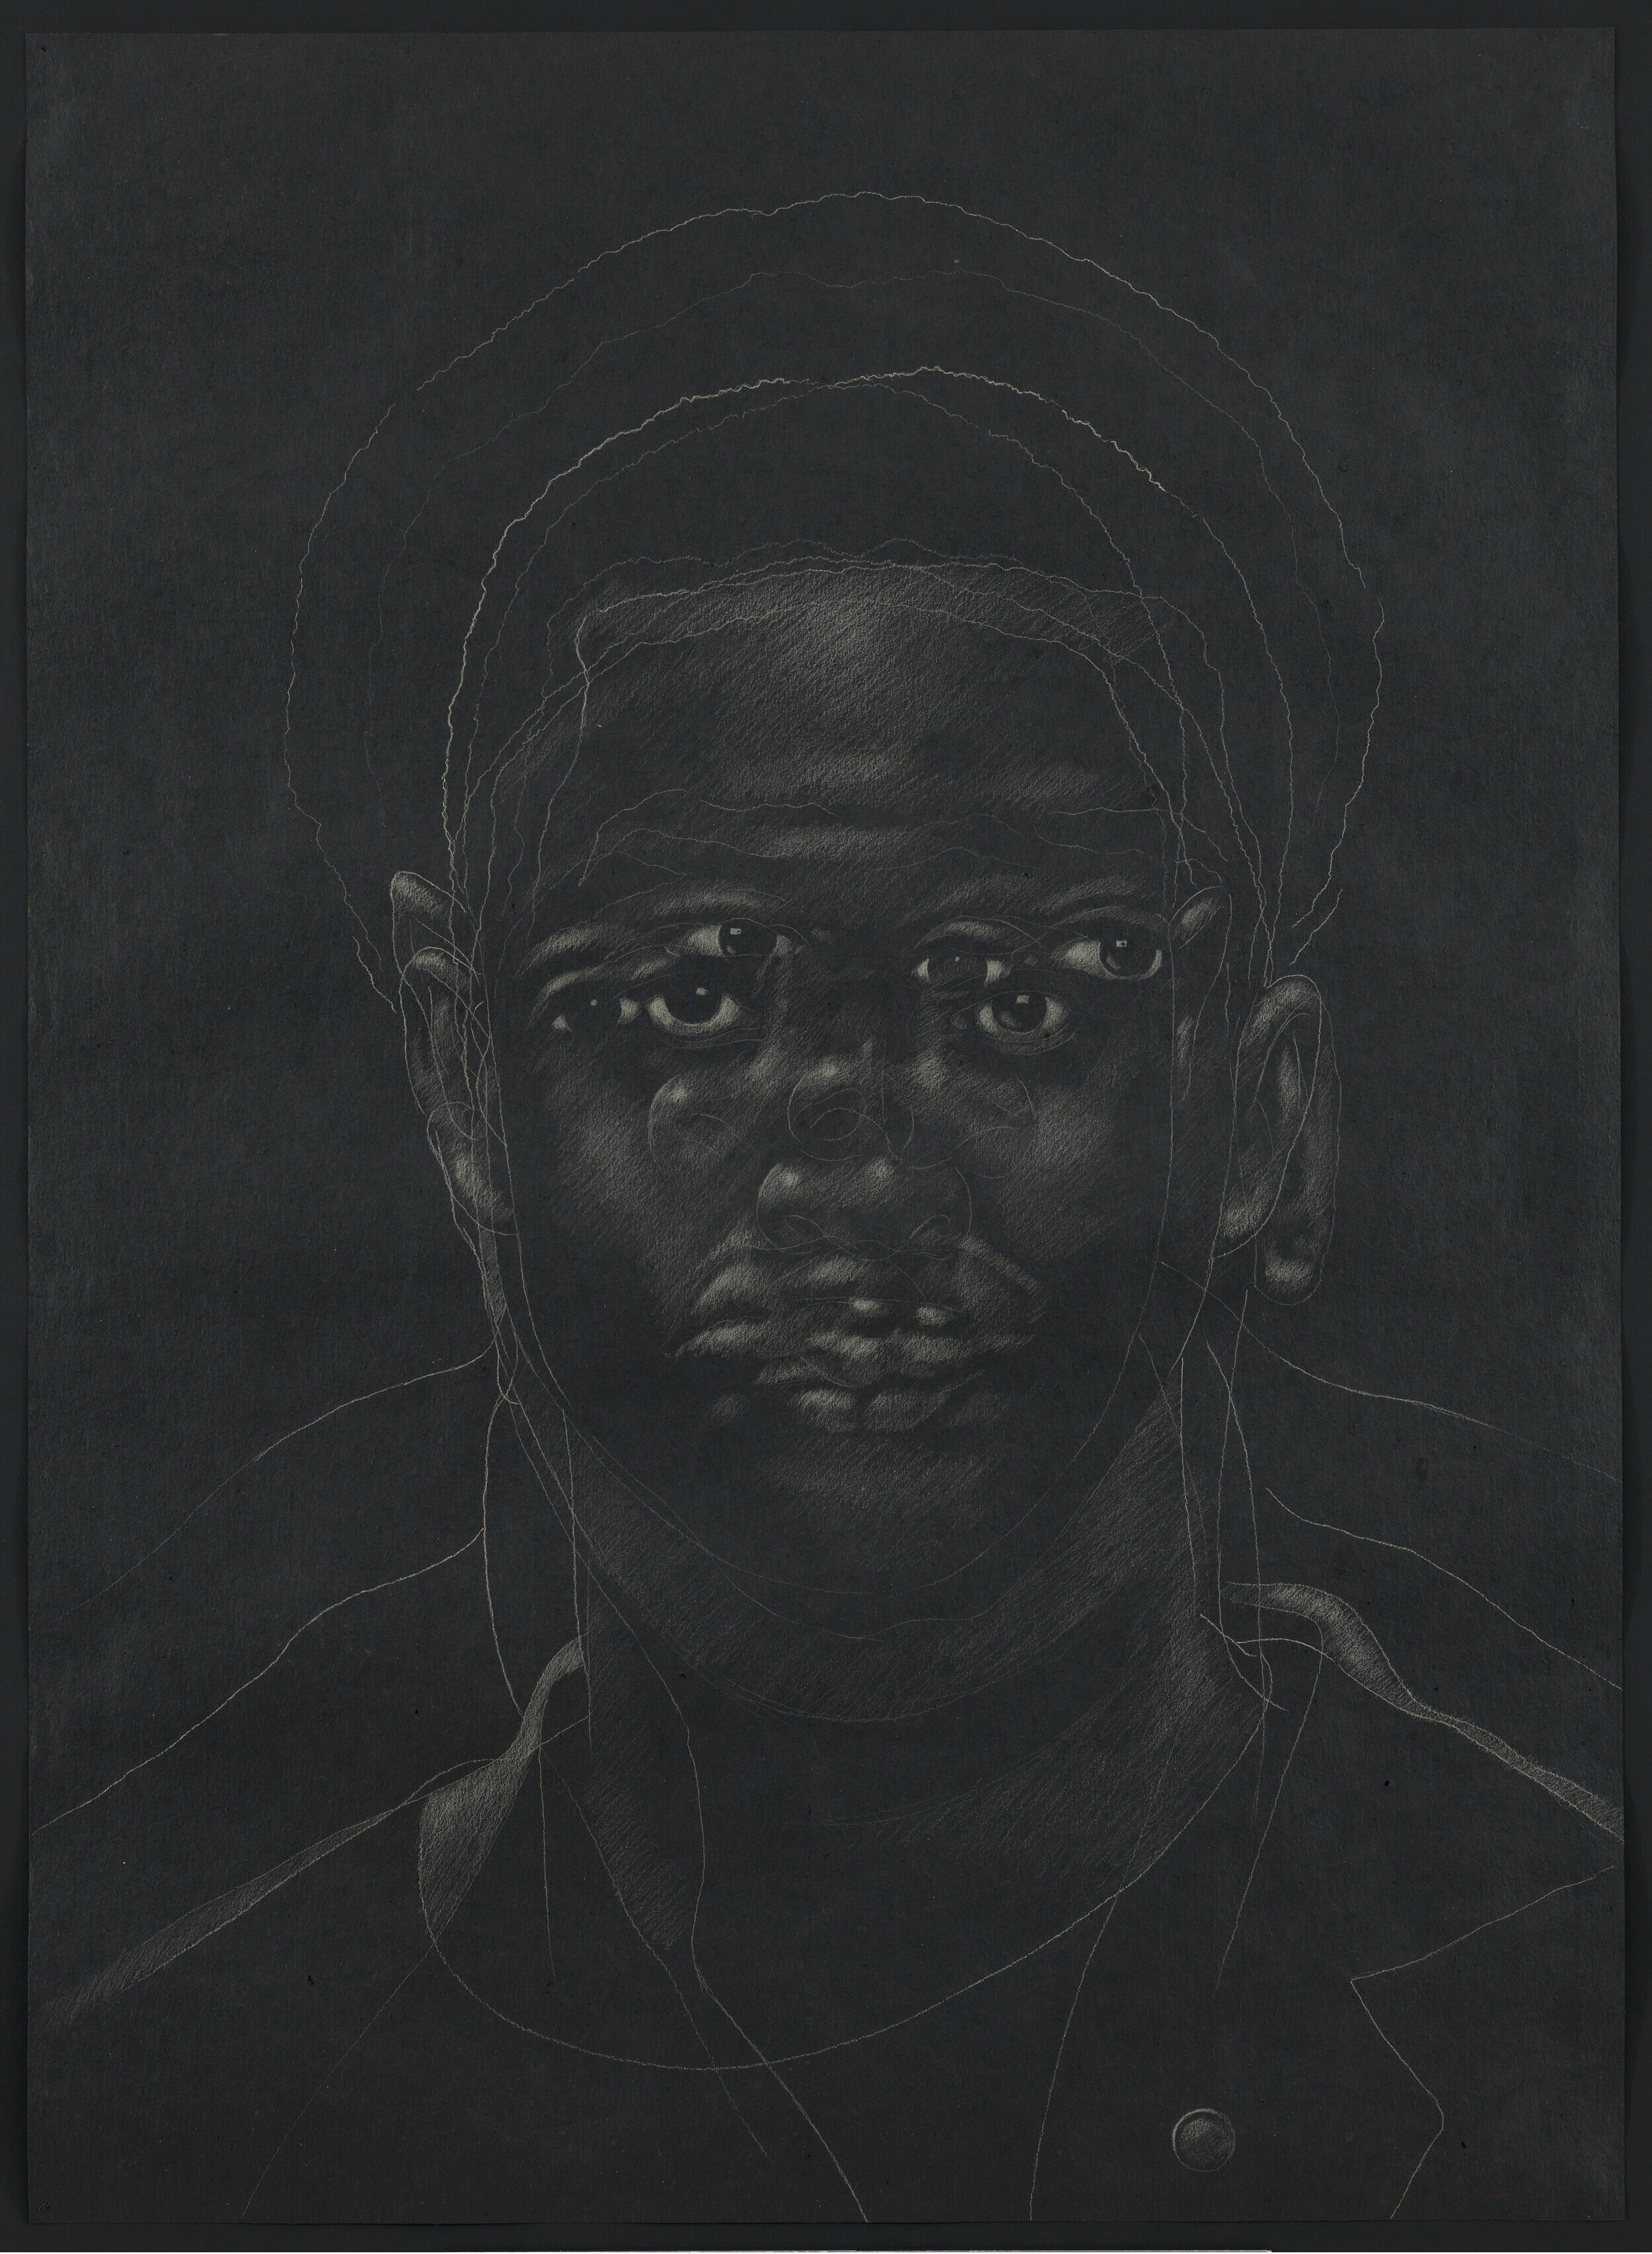  Titus Kaphar.  The Jerome Project (Asphalt and Chalk) XV , 2015. Chalk on asphalt paper, 49 x 36 inches. Museum of Modern Art, Fund for the Twenty-First Century. ©Titus Kaphar. Digital Image ©The Museum of Modern Art/Licensed by SCALA/ArtResource, N